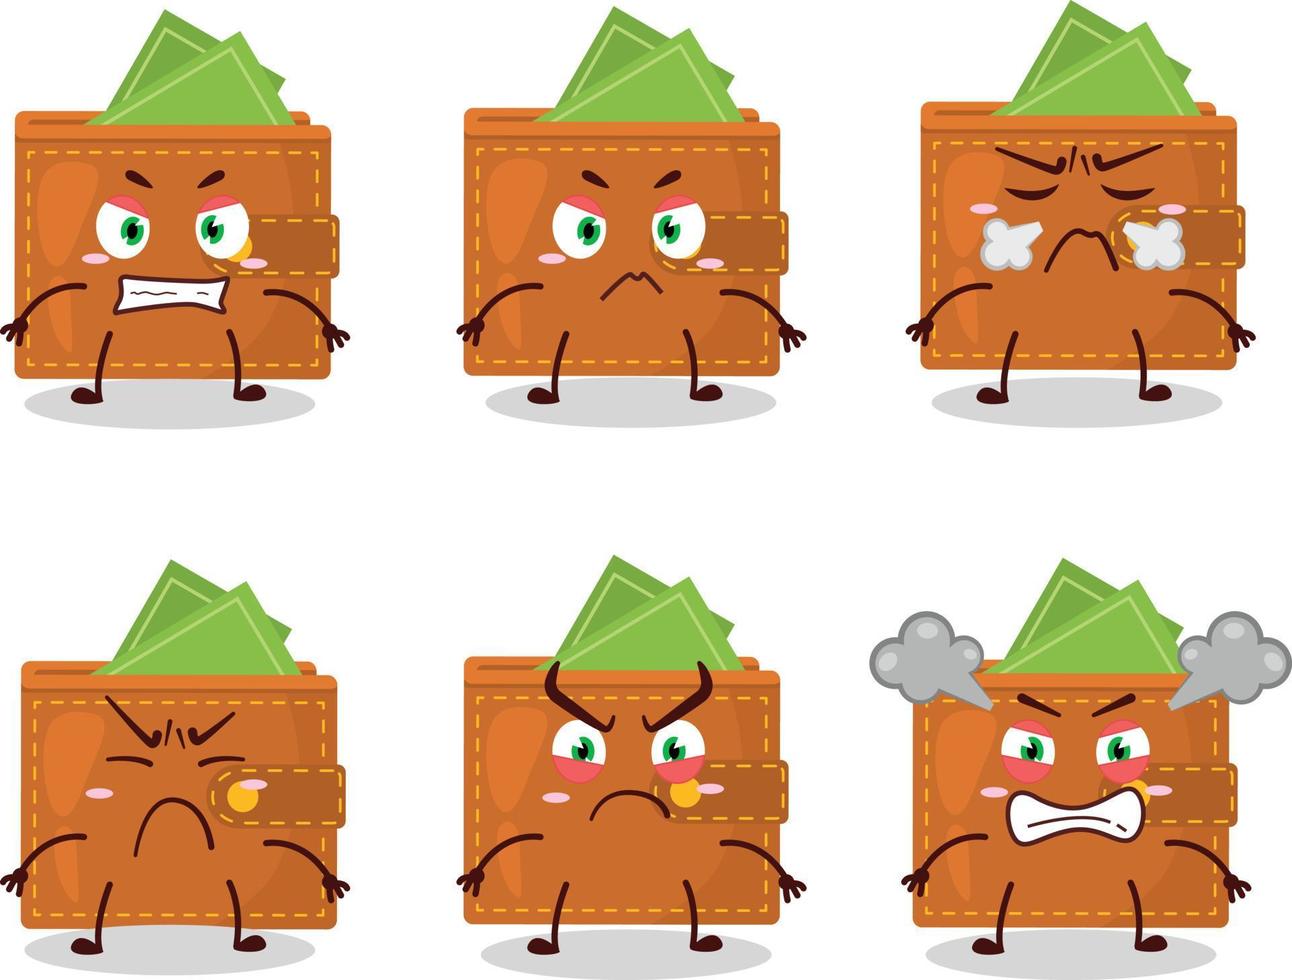 Wallet cartoon character with various angry expressions vector